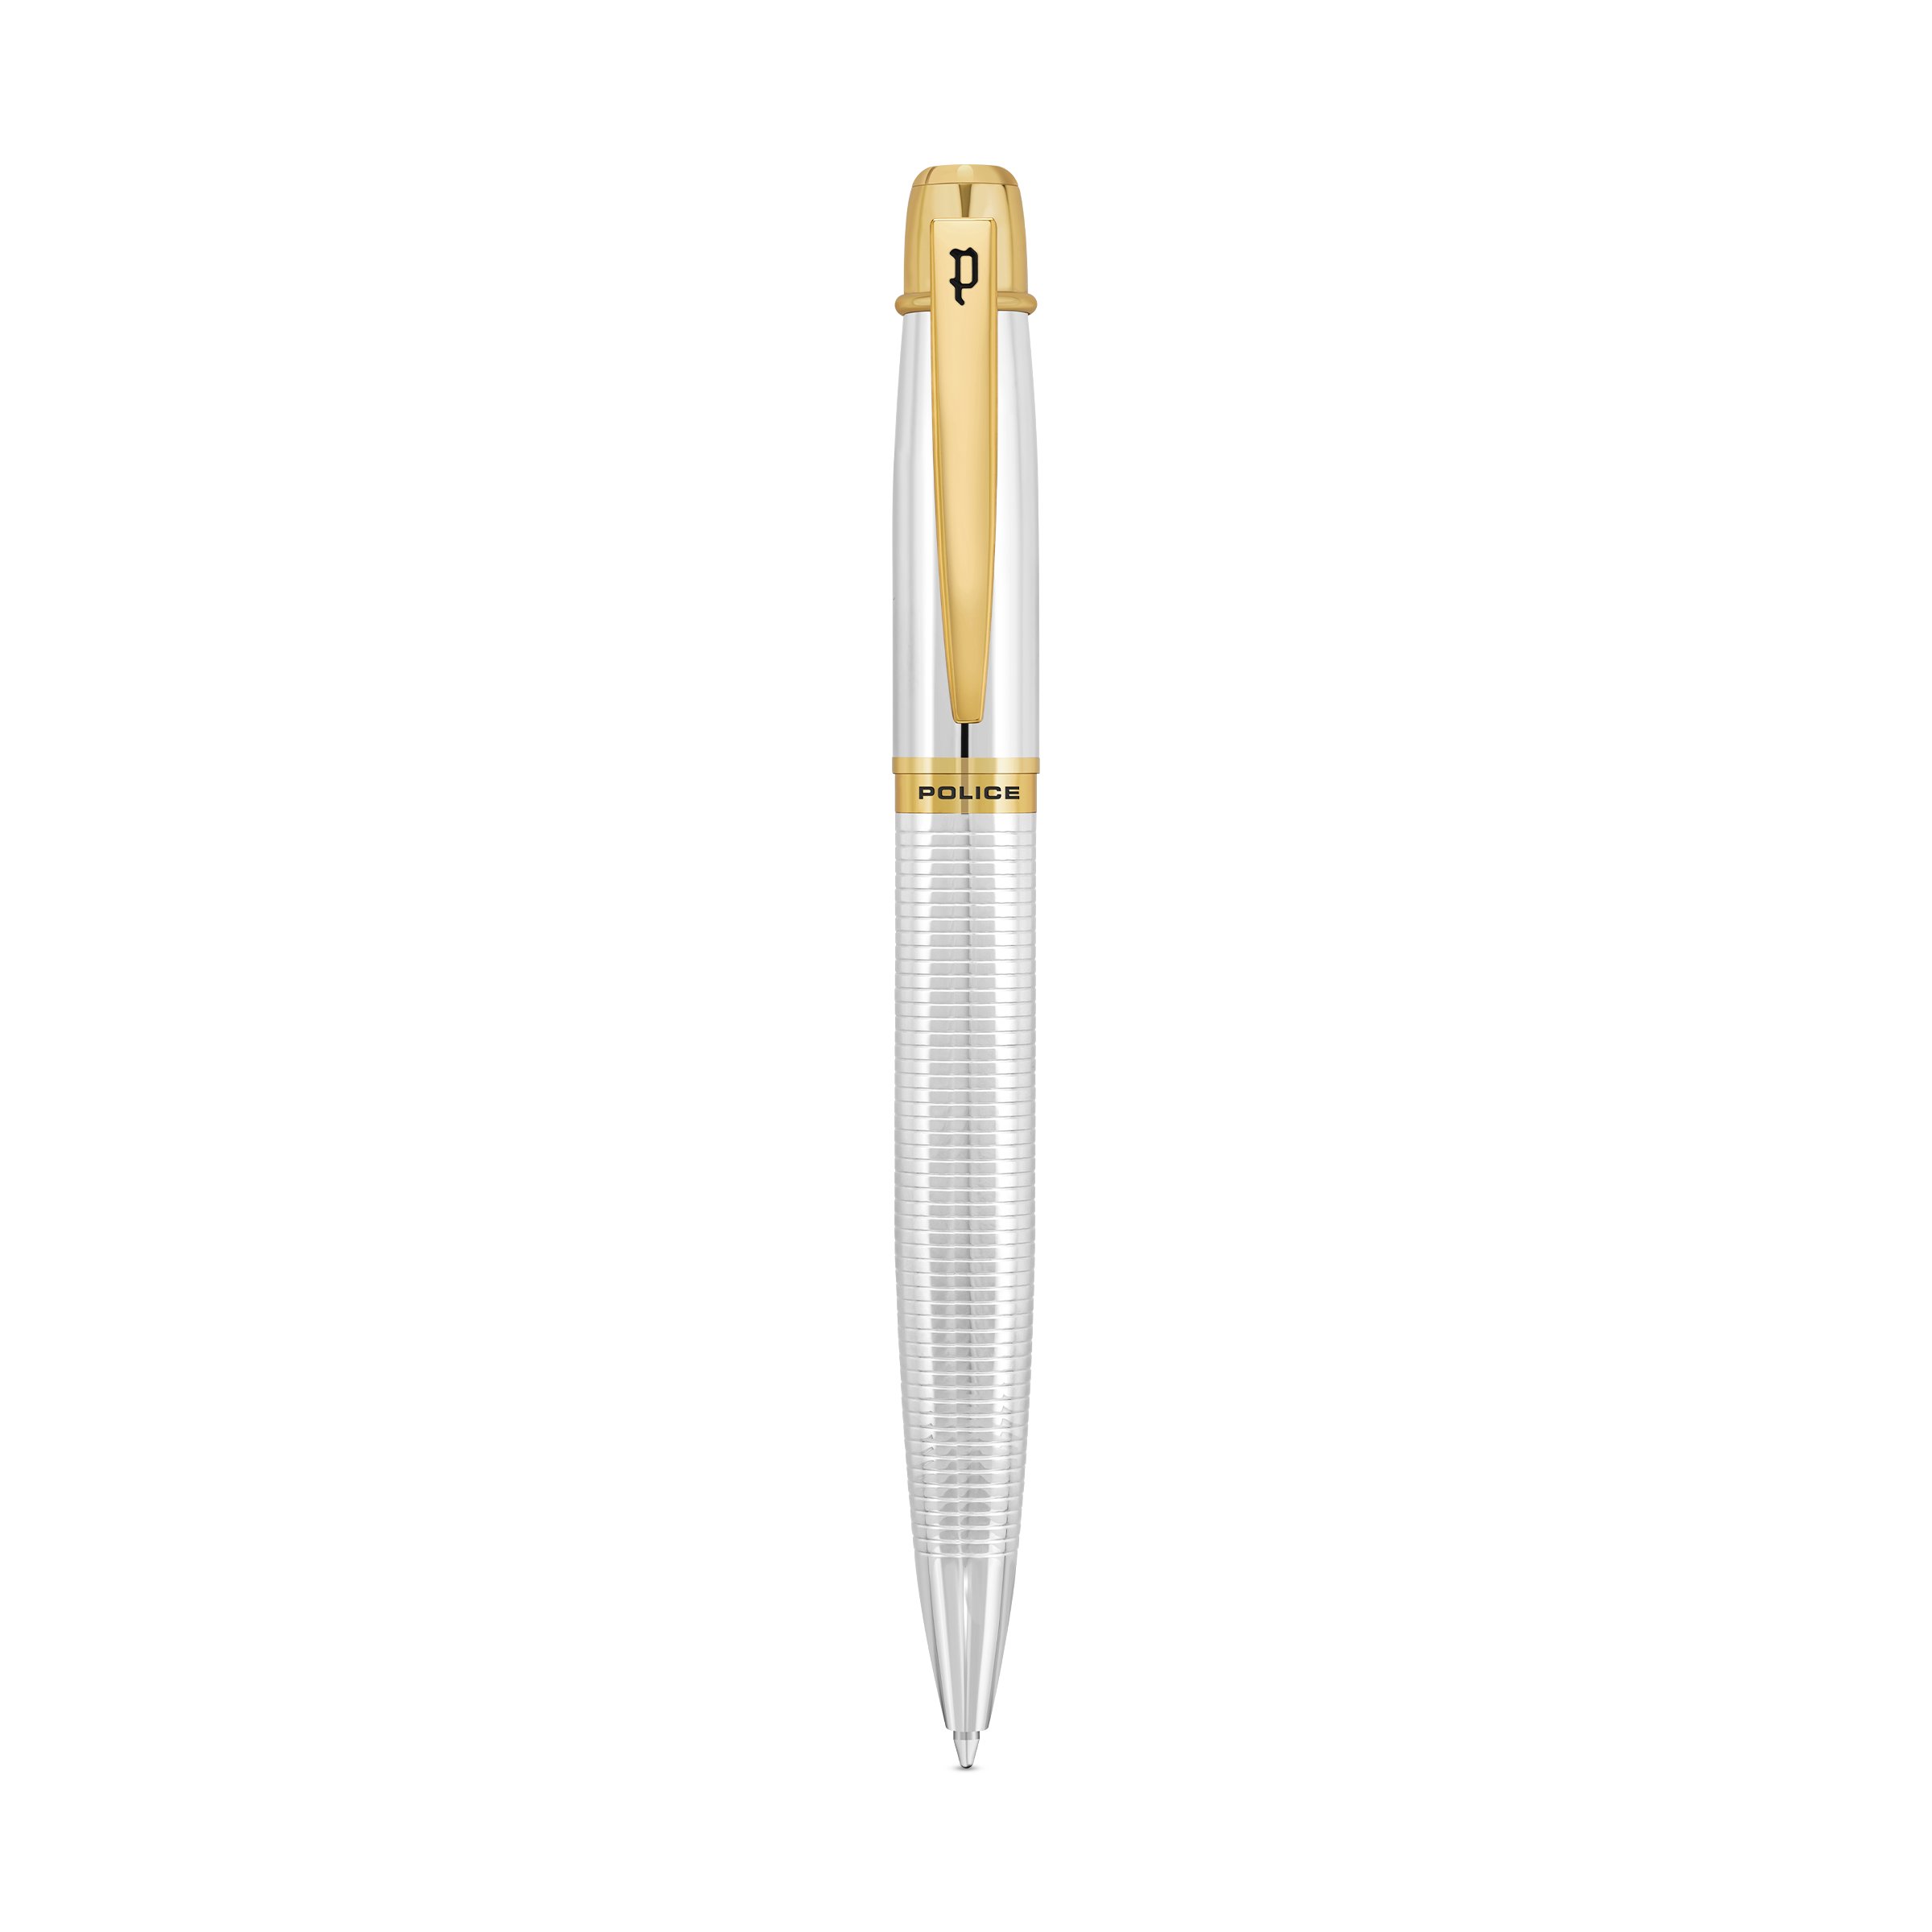 Police Pen For Men- Silver and Gold Color -Ball Point - PERGR0001404